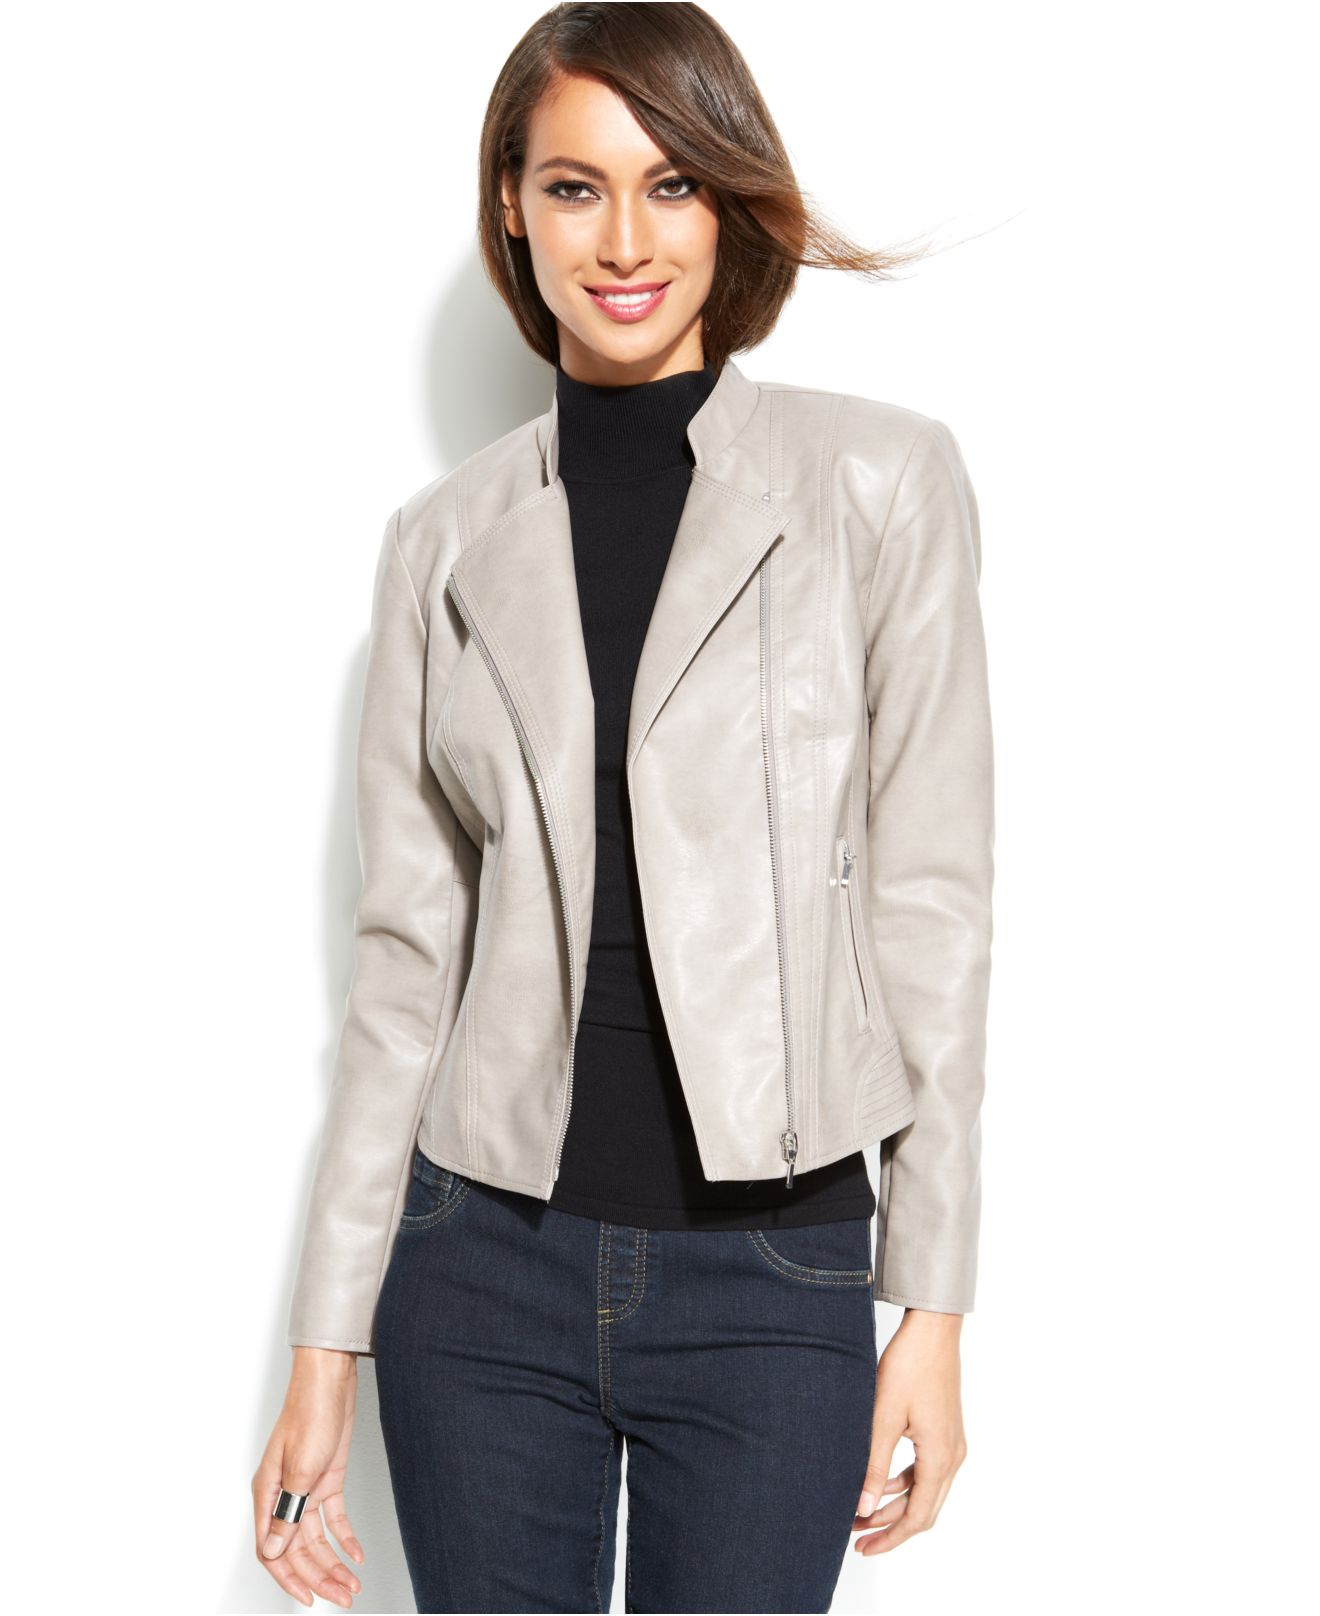 Lyst - Inc International Concepts Faux-Leather Moto Jacket in Gray